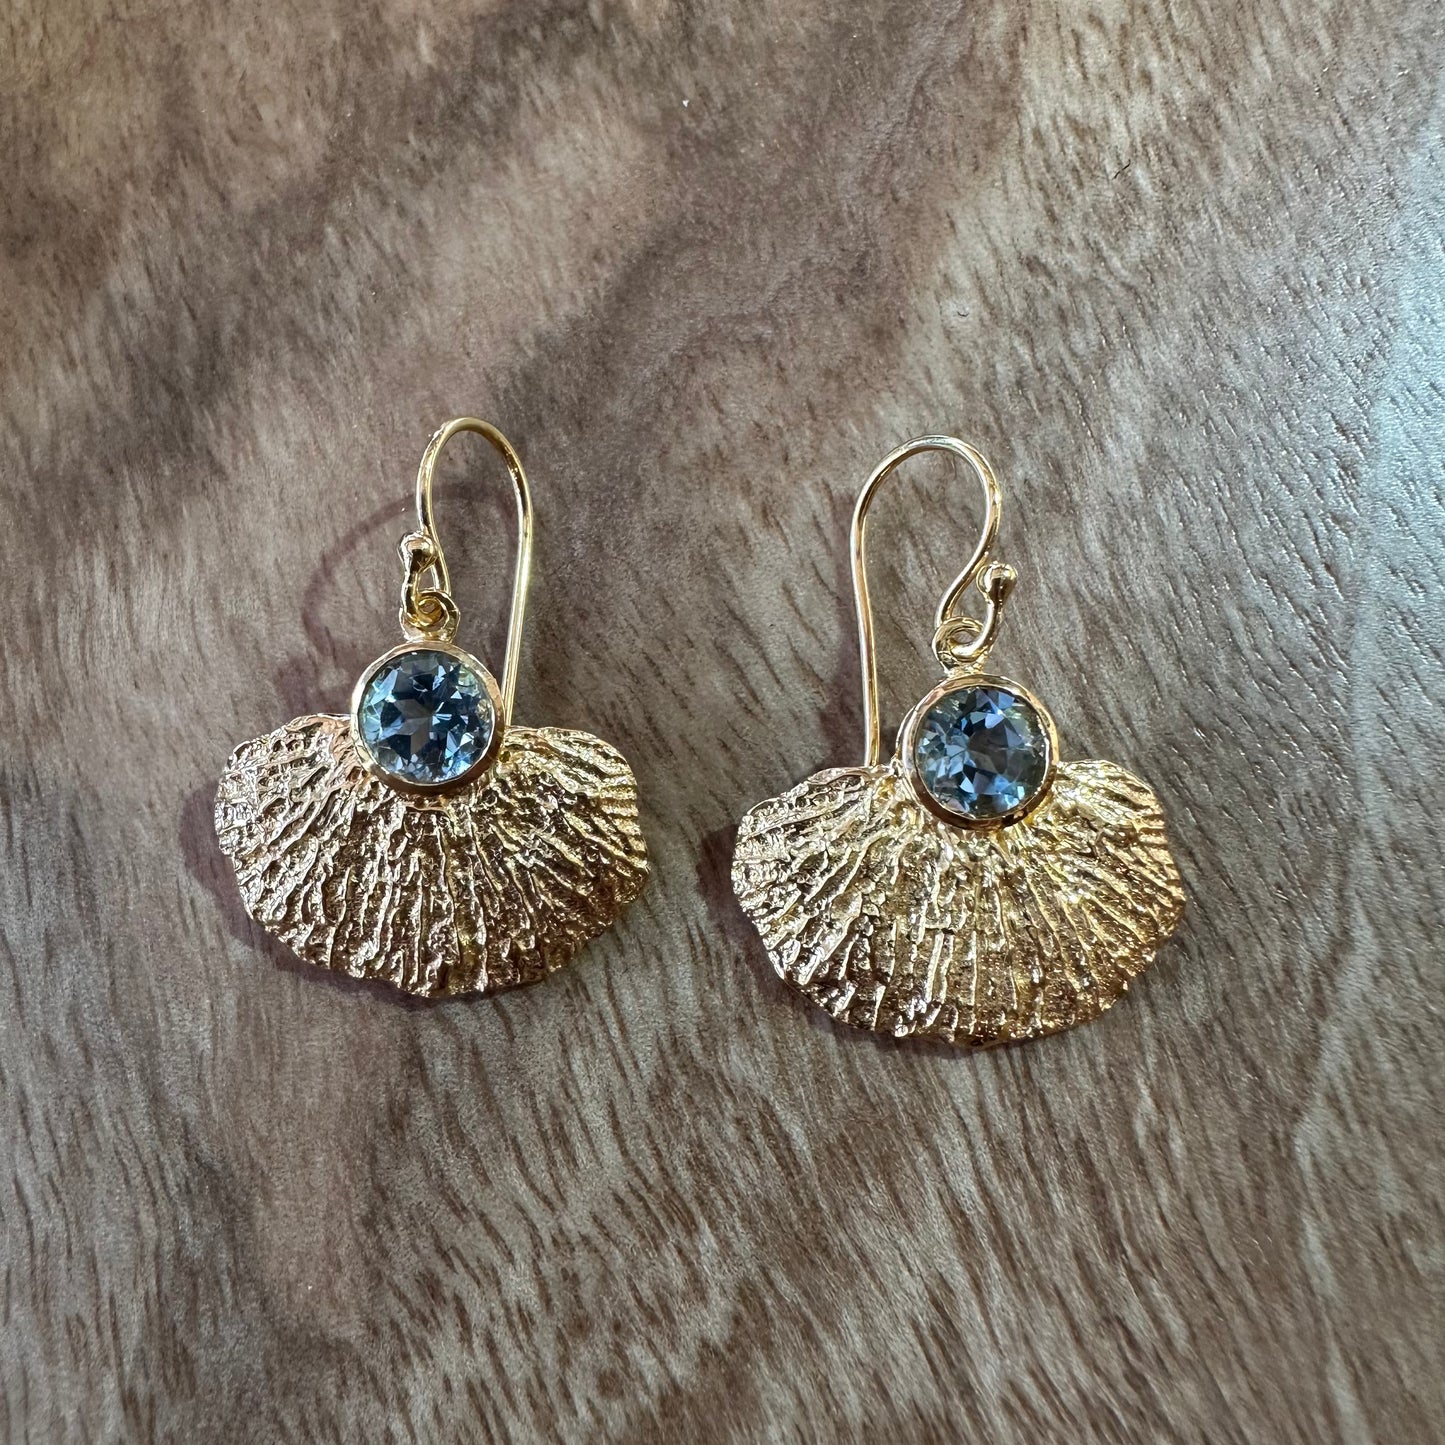 Earrings - Coral Garden, Blue Topaz and 18kt Yellow Gold Finish